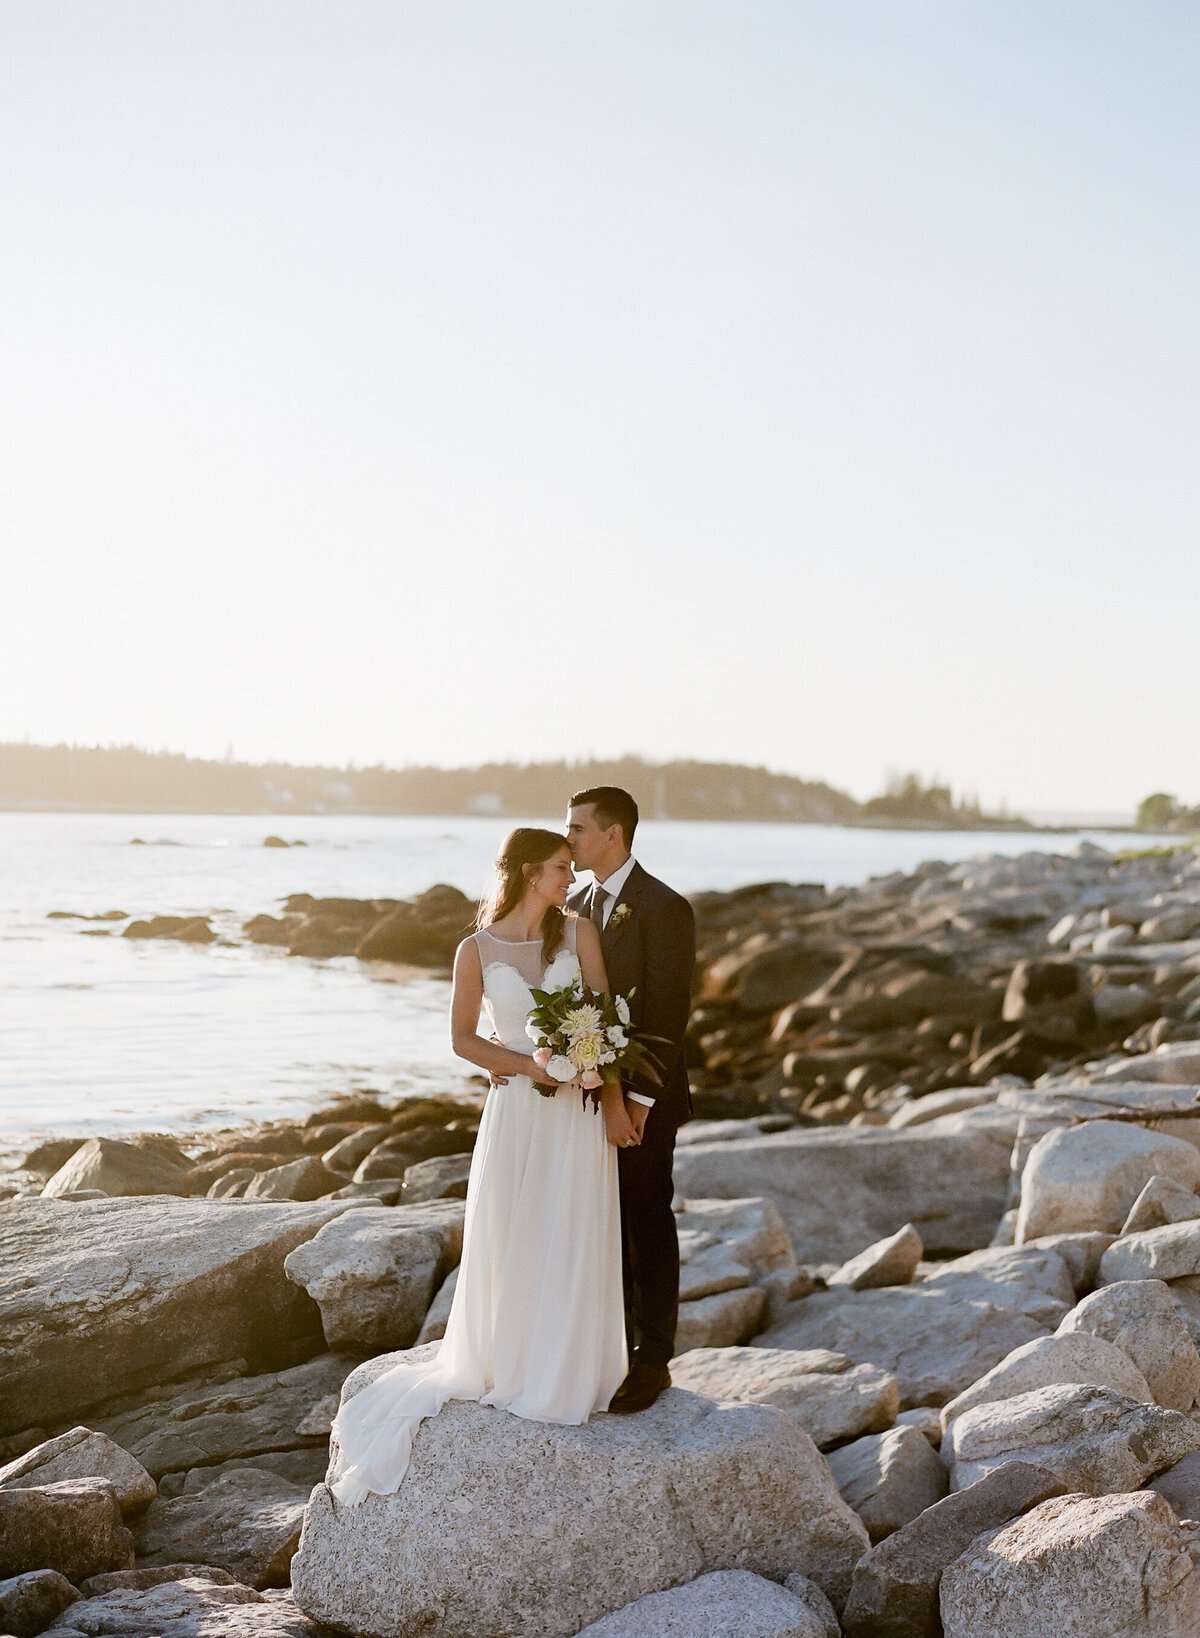 Jacqueline Anne Photography - Halifax Wedding Photographer - Jaclyn and Morgan-103